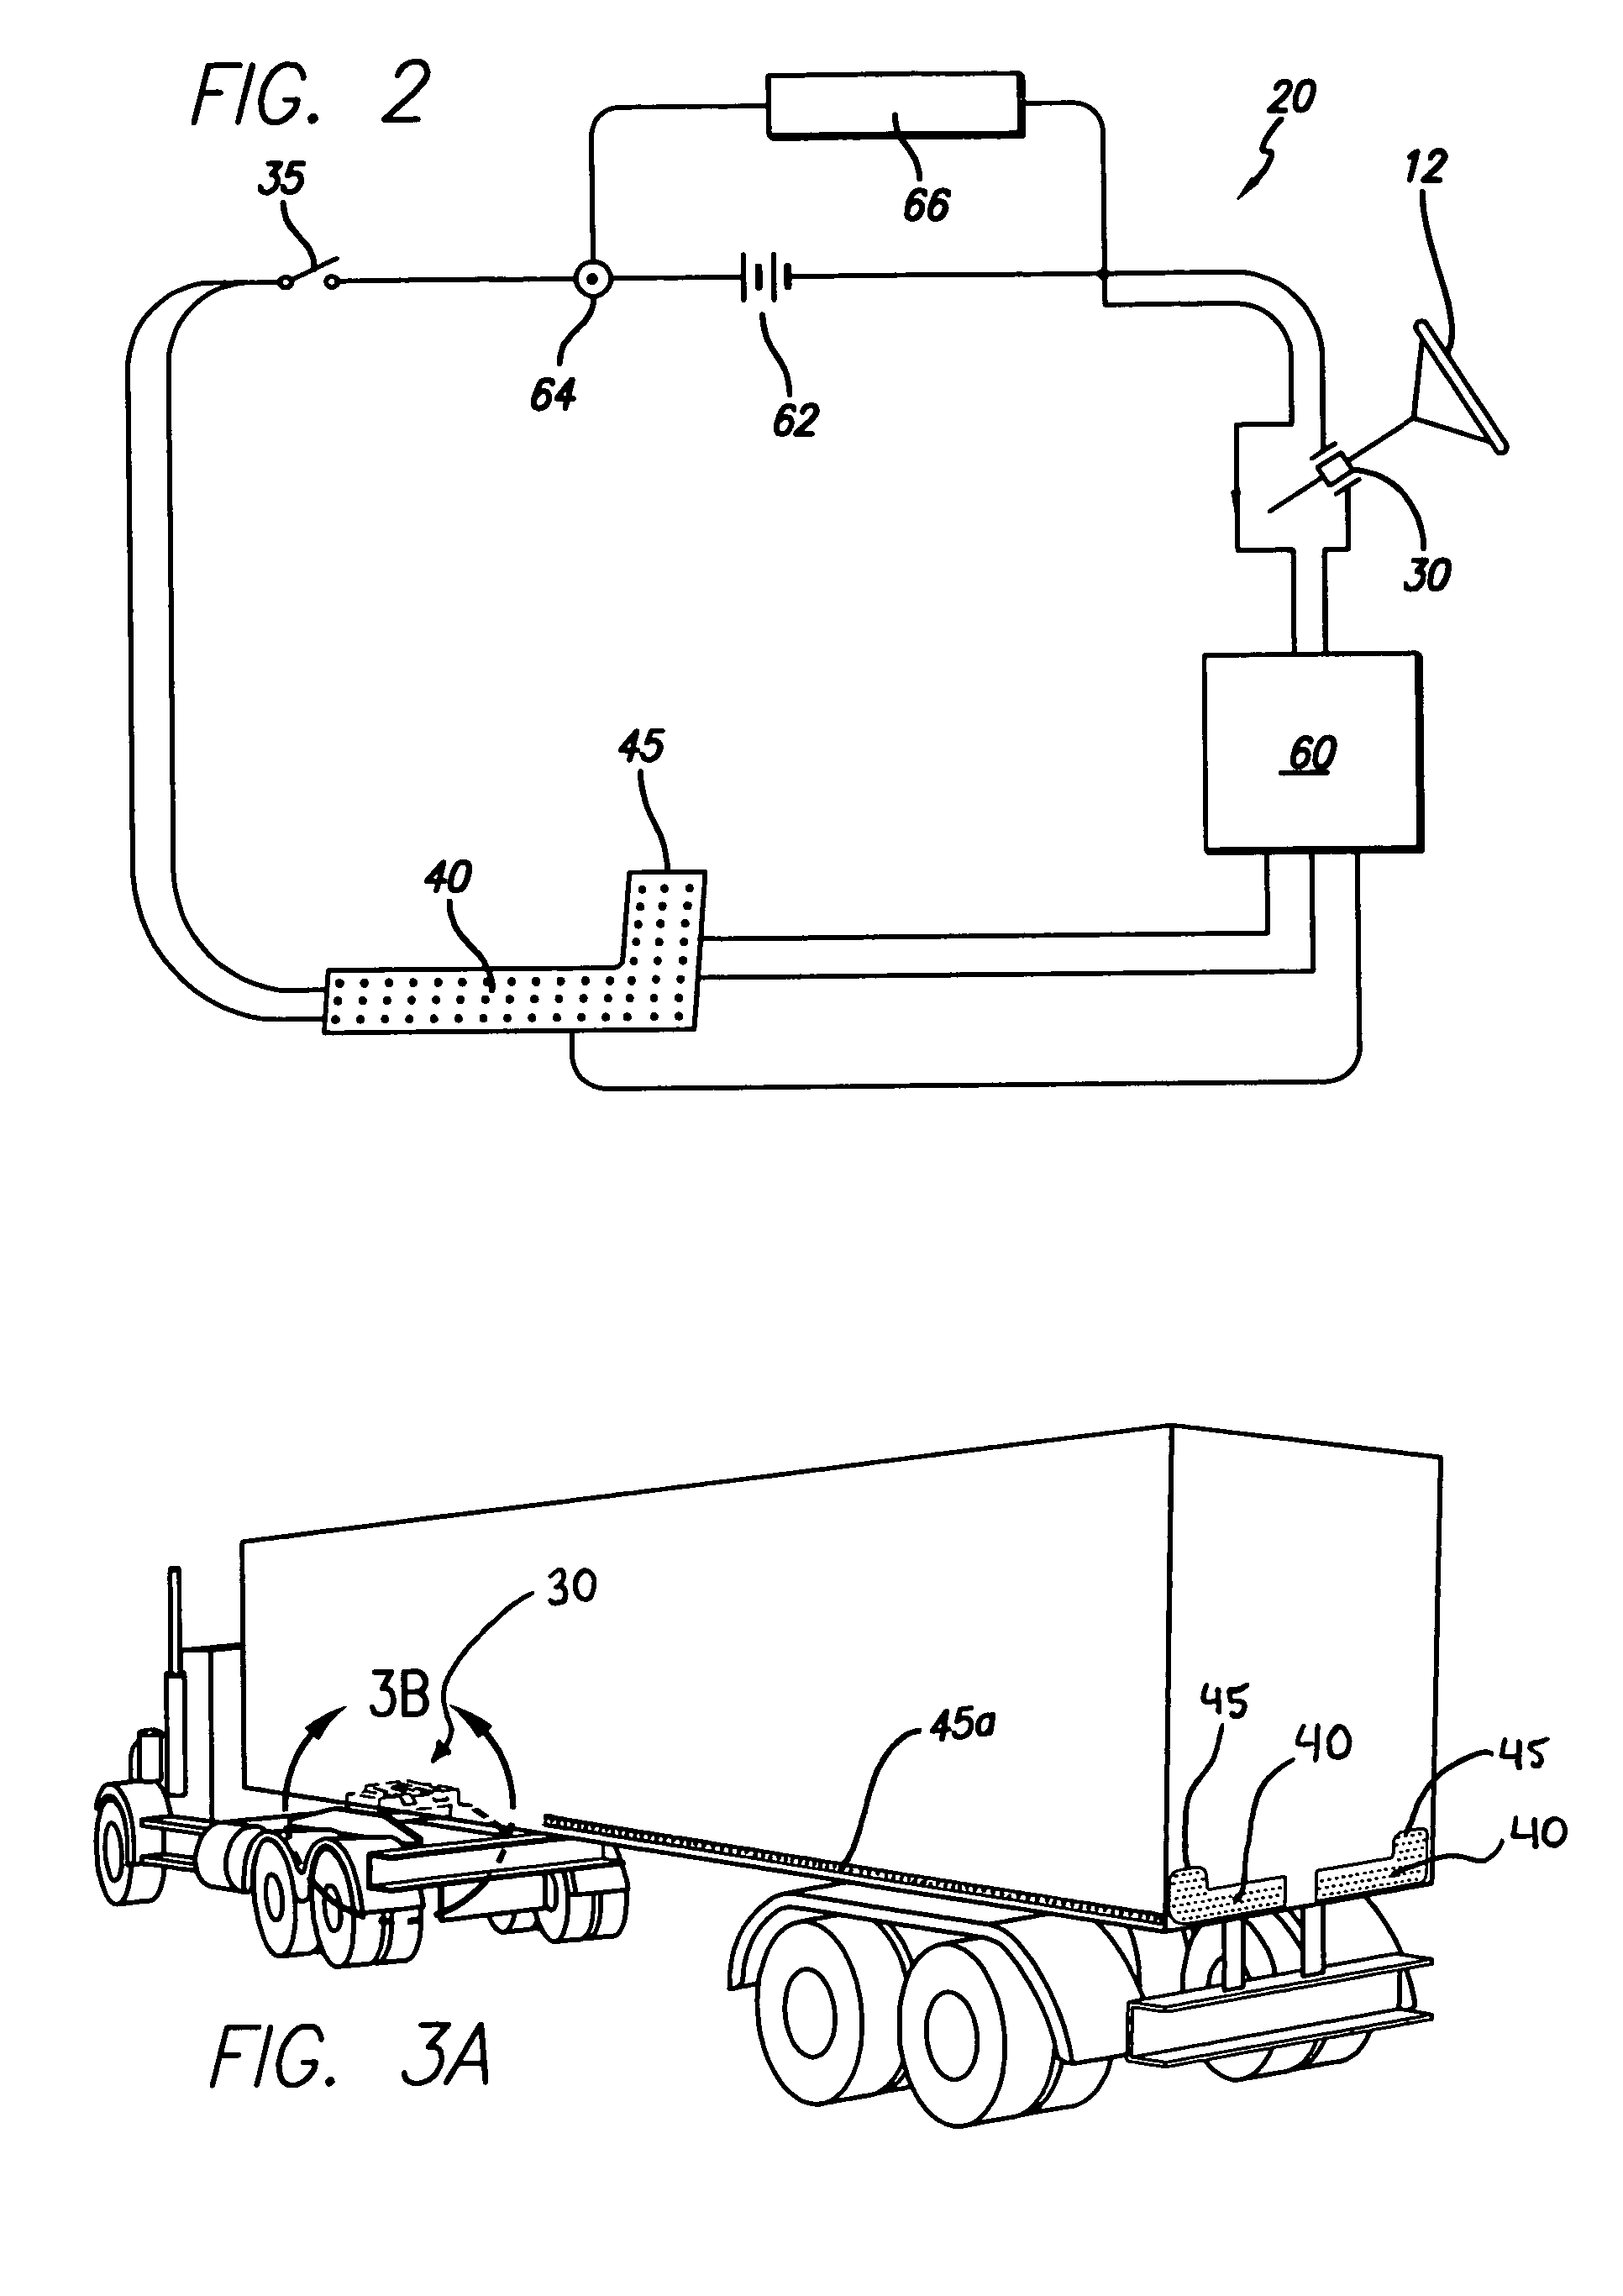 Dynamic vehicle signaling device and system